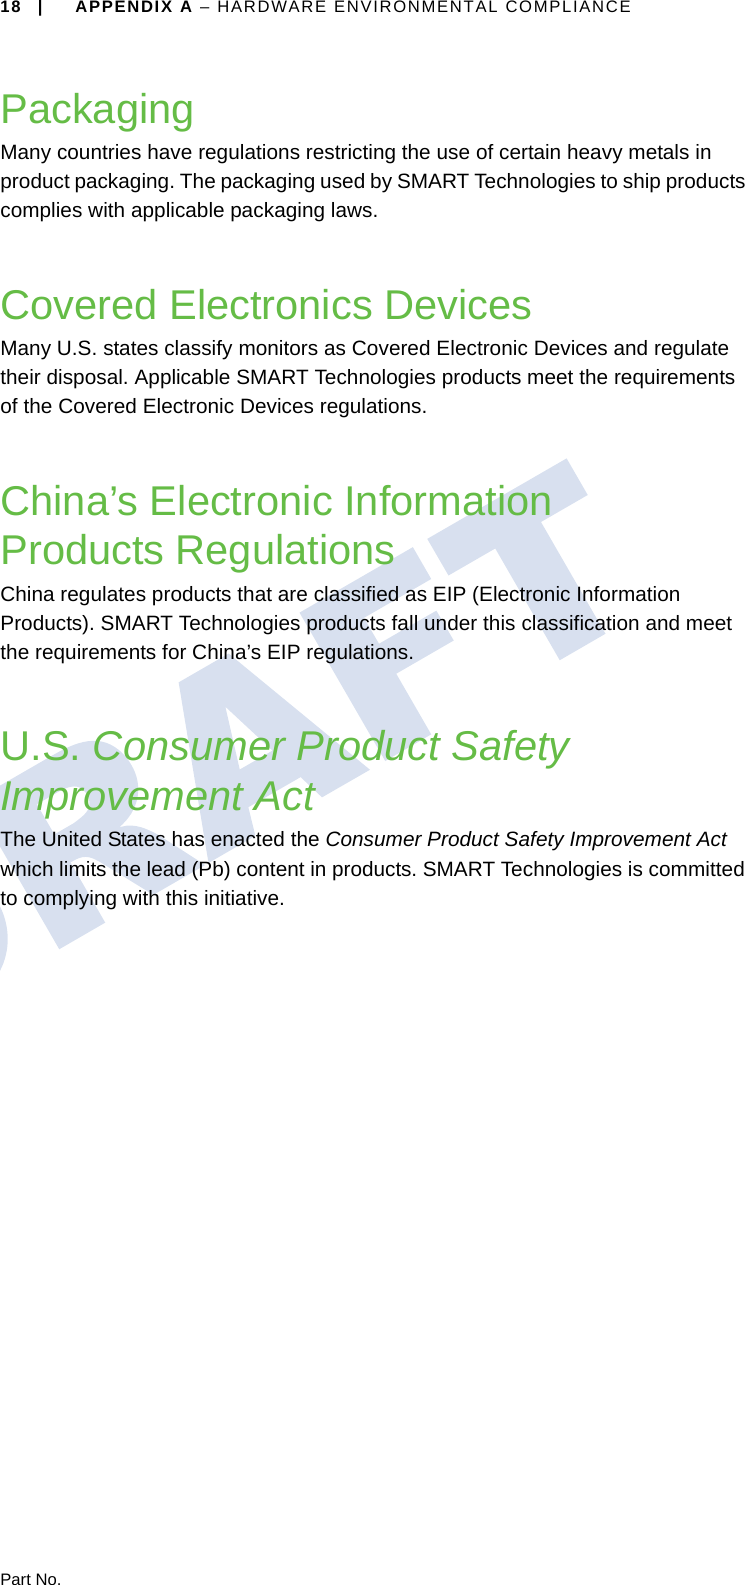 18 | APPENDIX A – HARDWARE ENVIRONMENTAL COMPLIANCEPart No.PackagingMany countries have regulations restricting the use of certain heavy metals in product packaging. The packaging used by SMART Technologies to ship products complies with applicable packaging laws.Covered Electronics DevicesMany U.S. states classify monitors as Covered Electronic Devices and regulate their disposal. Applicable SMART Technologies products meet the requirements of the Covered Electronic Devices regulations.China’s Electronic Information Products RegulationsChina regulates products that are classified as EIP (Electronic Information Products). SMART Technologies products fall under this classification and meet the requirements for China’s EIP regulations.U.S. Consumer Product Safety Improvement ActThe United States has enacted the Consumer Product Safety Improvement Act which limits the lead (Pb) content in products. SMART Technologies is committed to complying with this initiative.